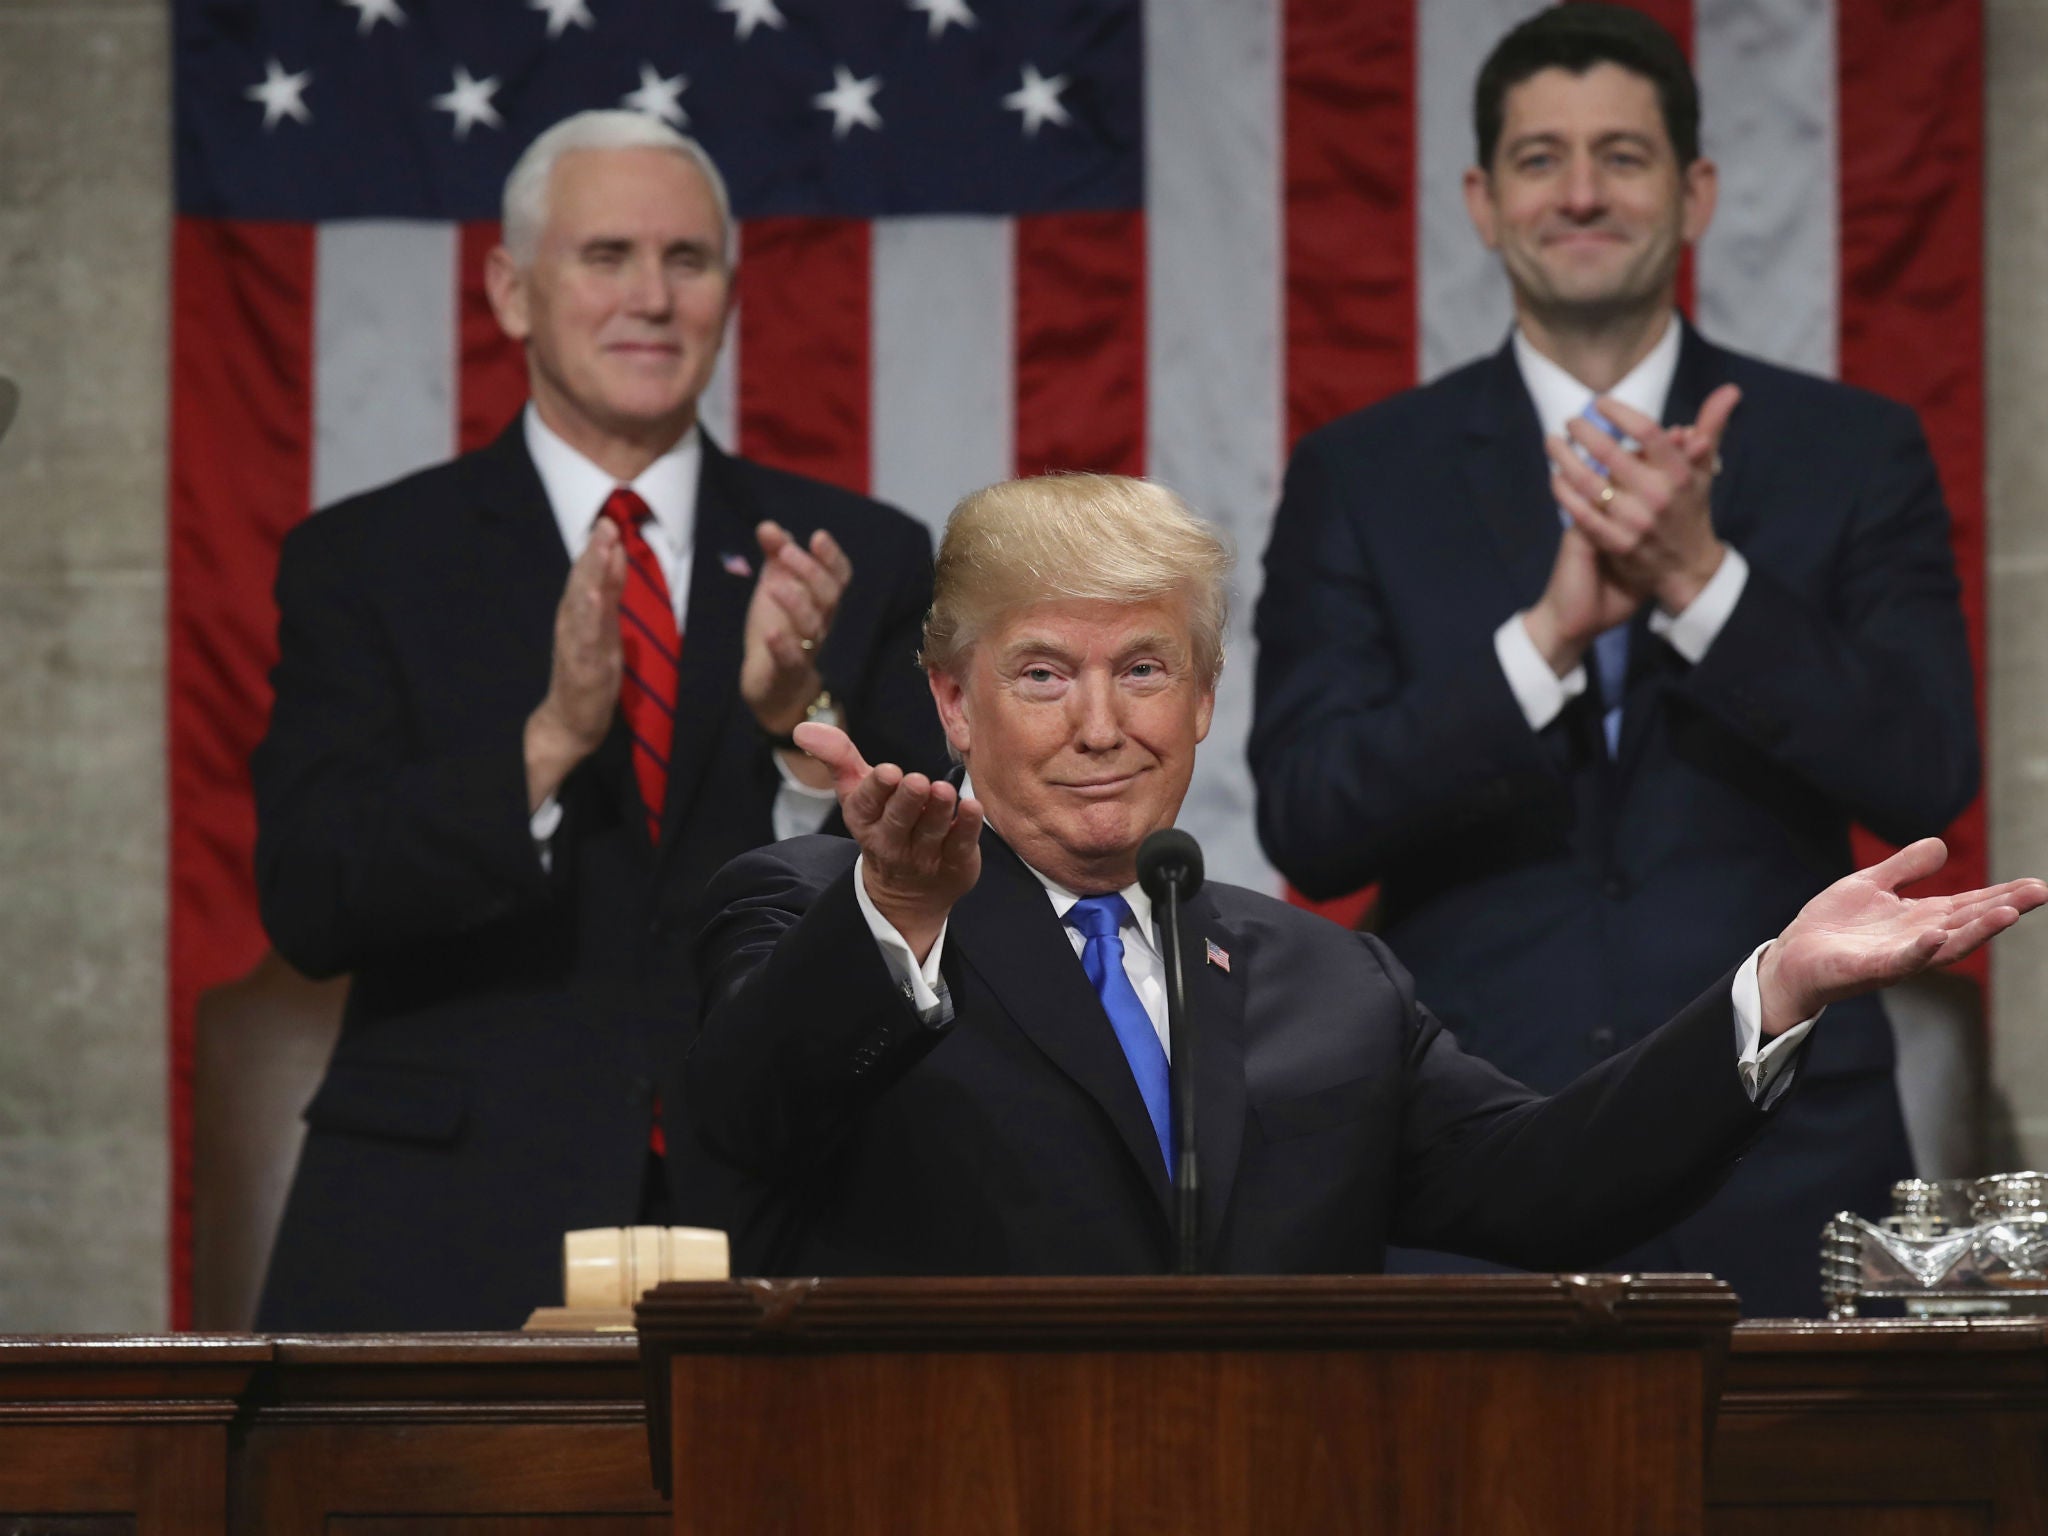 Donald Trump delivers his State of the Union address in the House chamber of the US Capitol